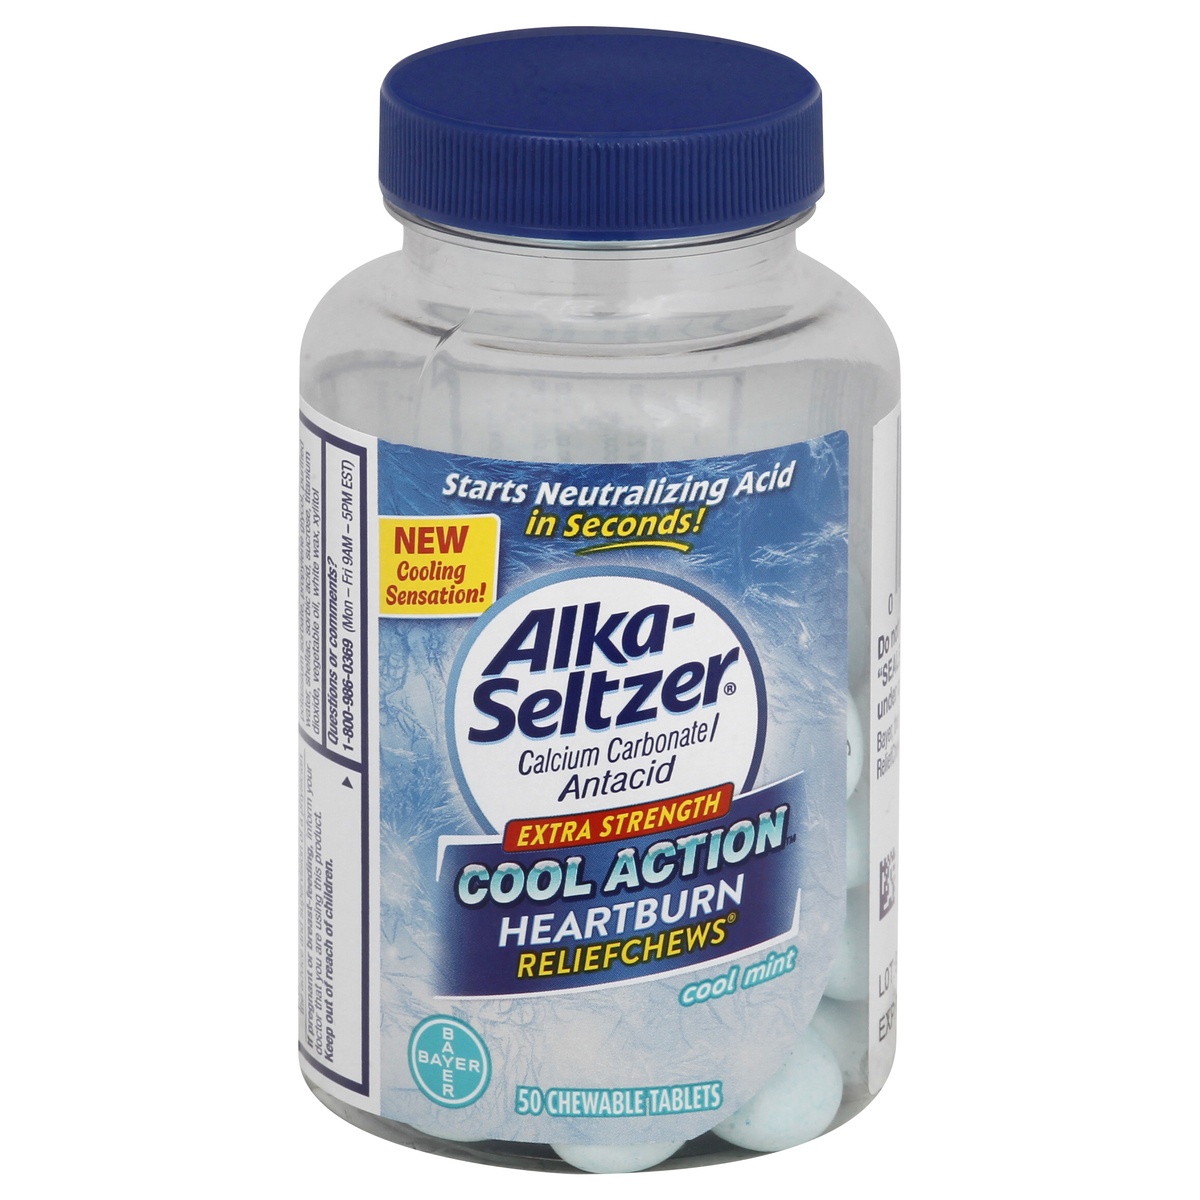 slide 1 of 1, Alka-Seltzer Antacid Extra Strength Cool Action Cool Mint Heartburn Relief Chews, 50 ct